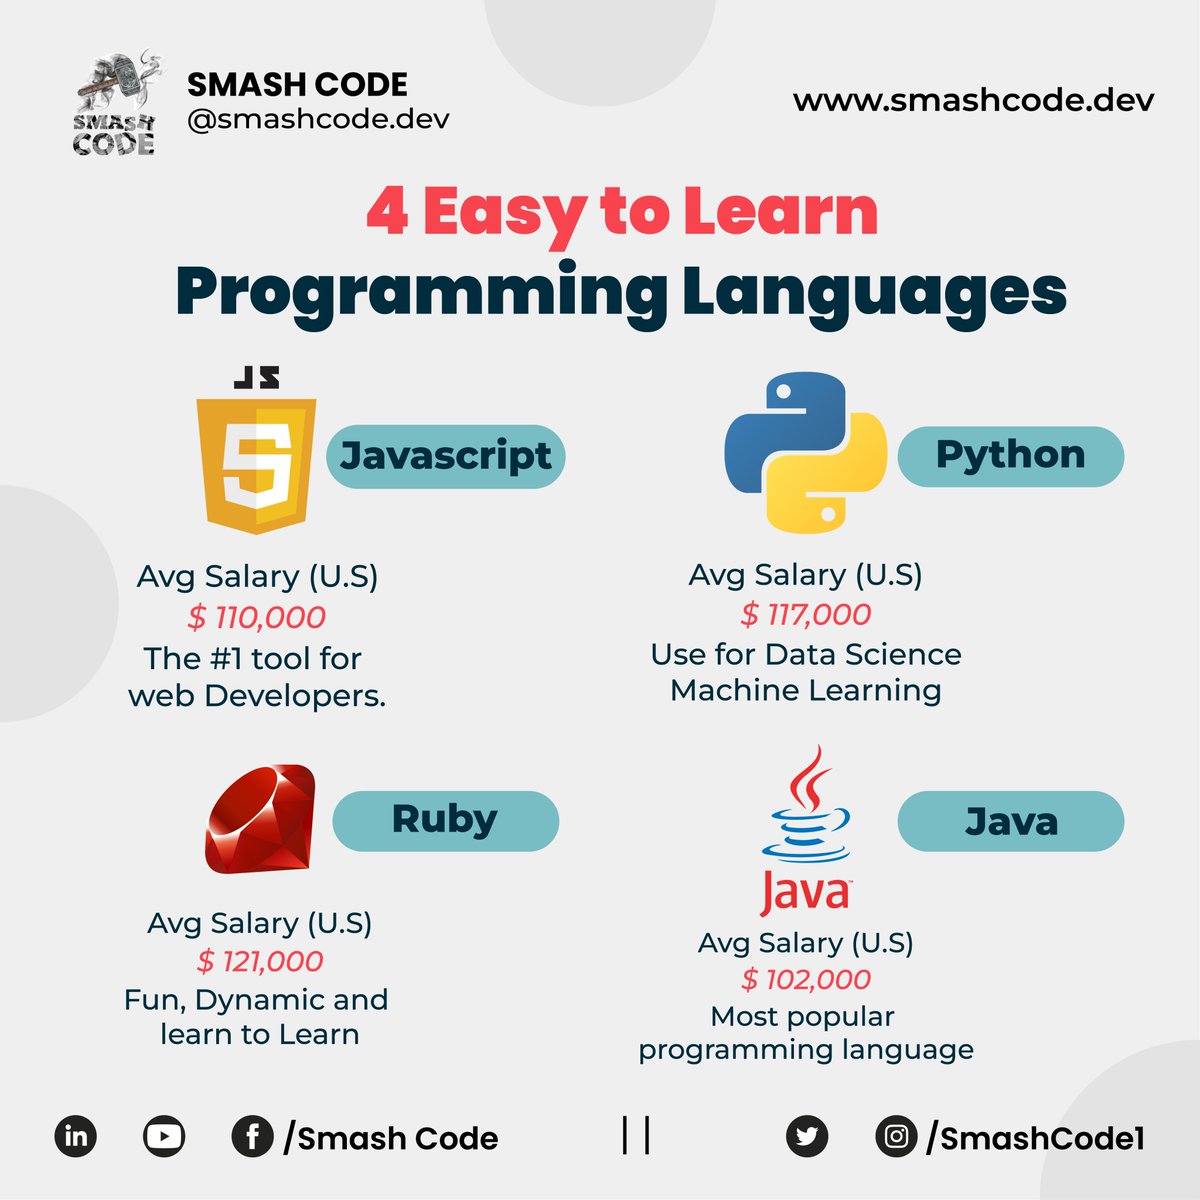 '4 Easy to Learn Programming Languages'
Web link in the first comment..
#smashcode #letsconnect #pythoncoding #python #pythondeveloper #pythoncode #pythonlearning #pythonprogramming #javafullstack #java #javascripttutorials #javajavajava #javaprogrammer #javascript #rubyonrails